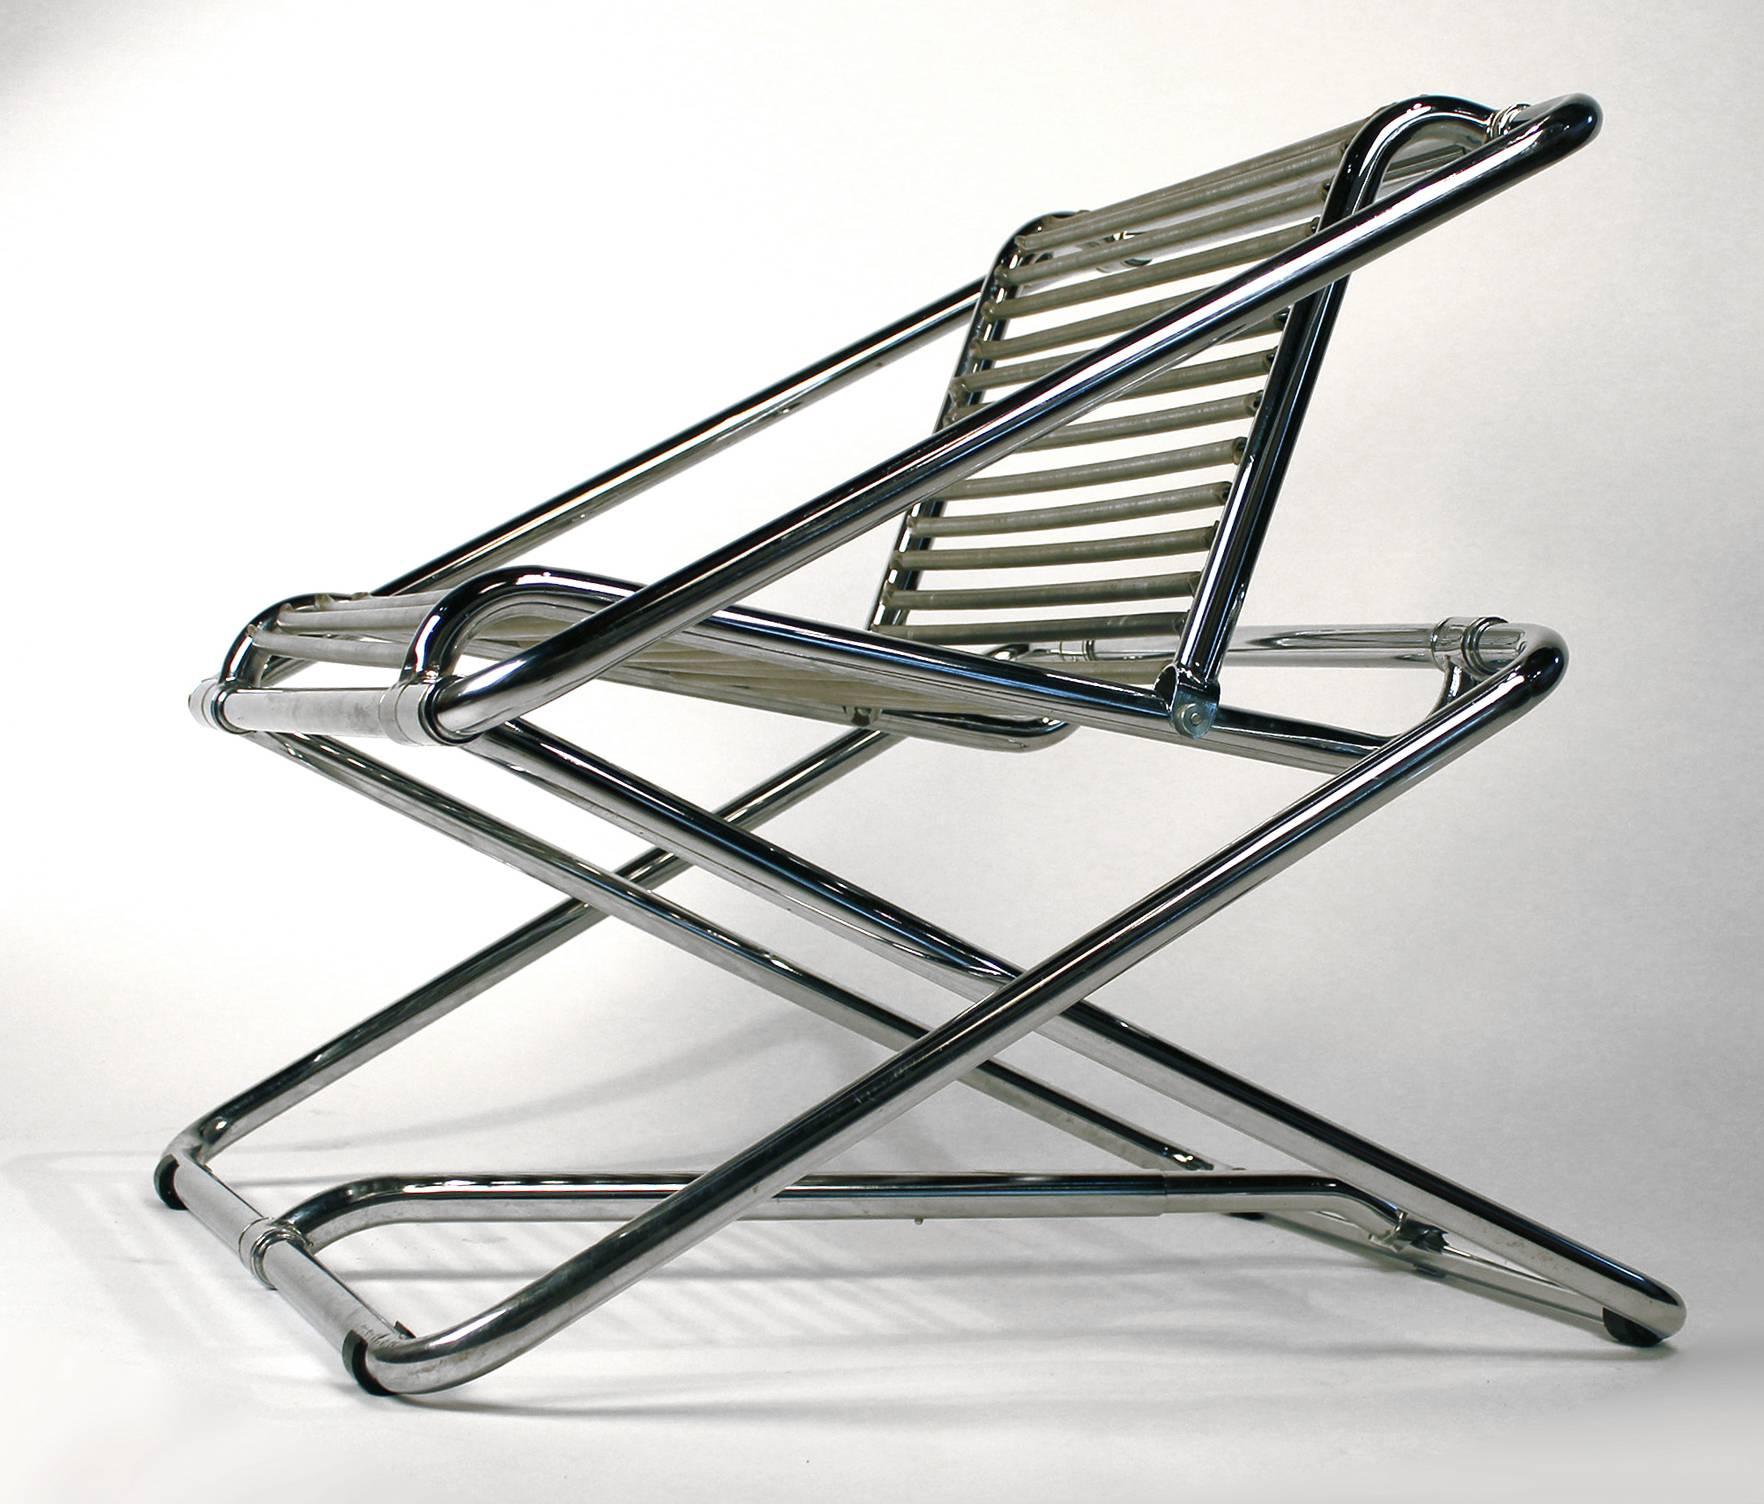 A rare chrome-plated bent tubular steel rocking chair with PVC-covered galvanized springs. Manufactured by One Off, Ltd., UK. From a series of approximately 70.